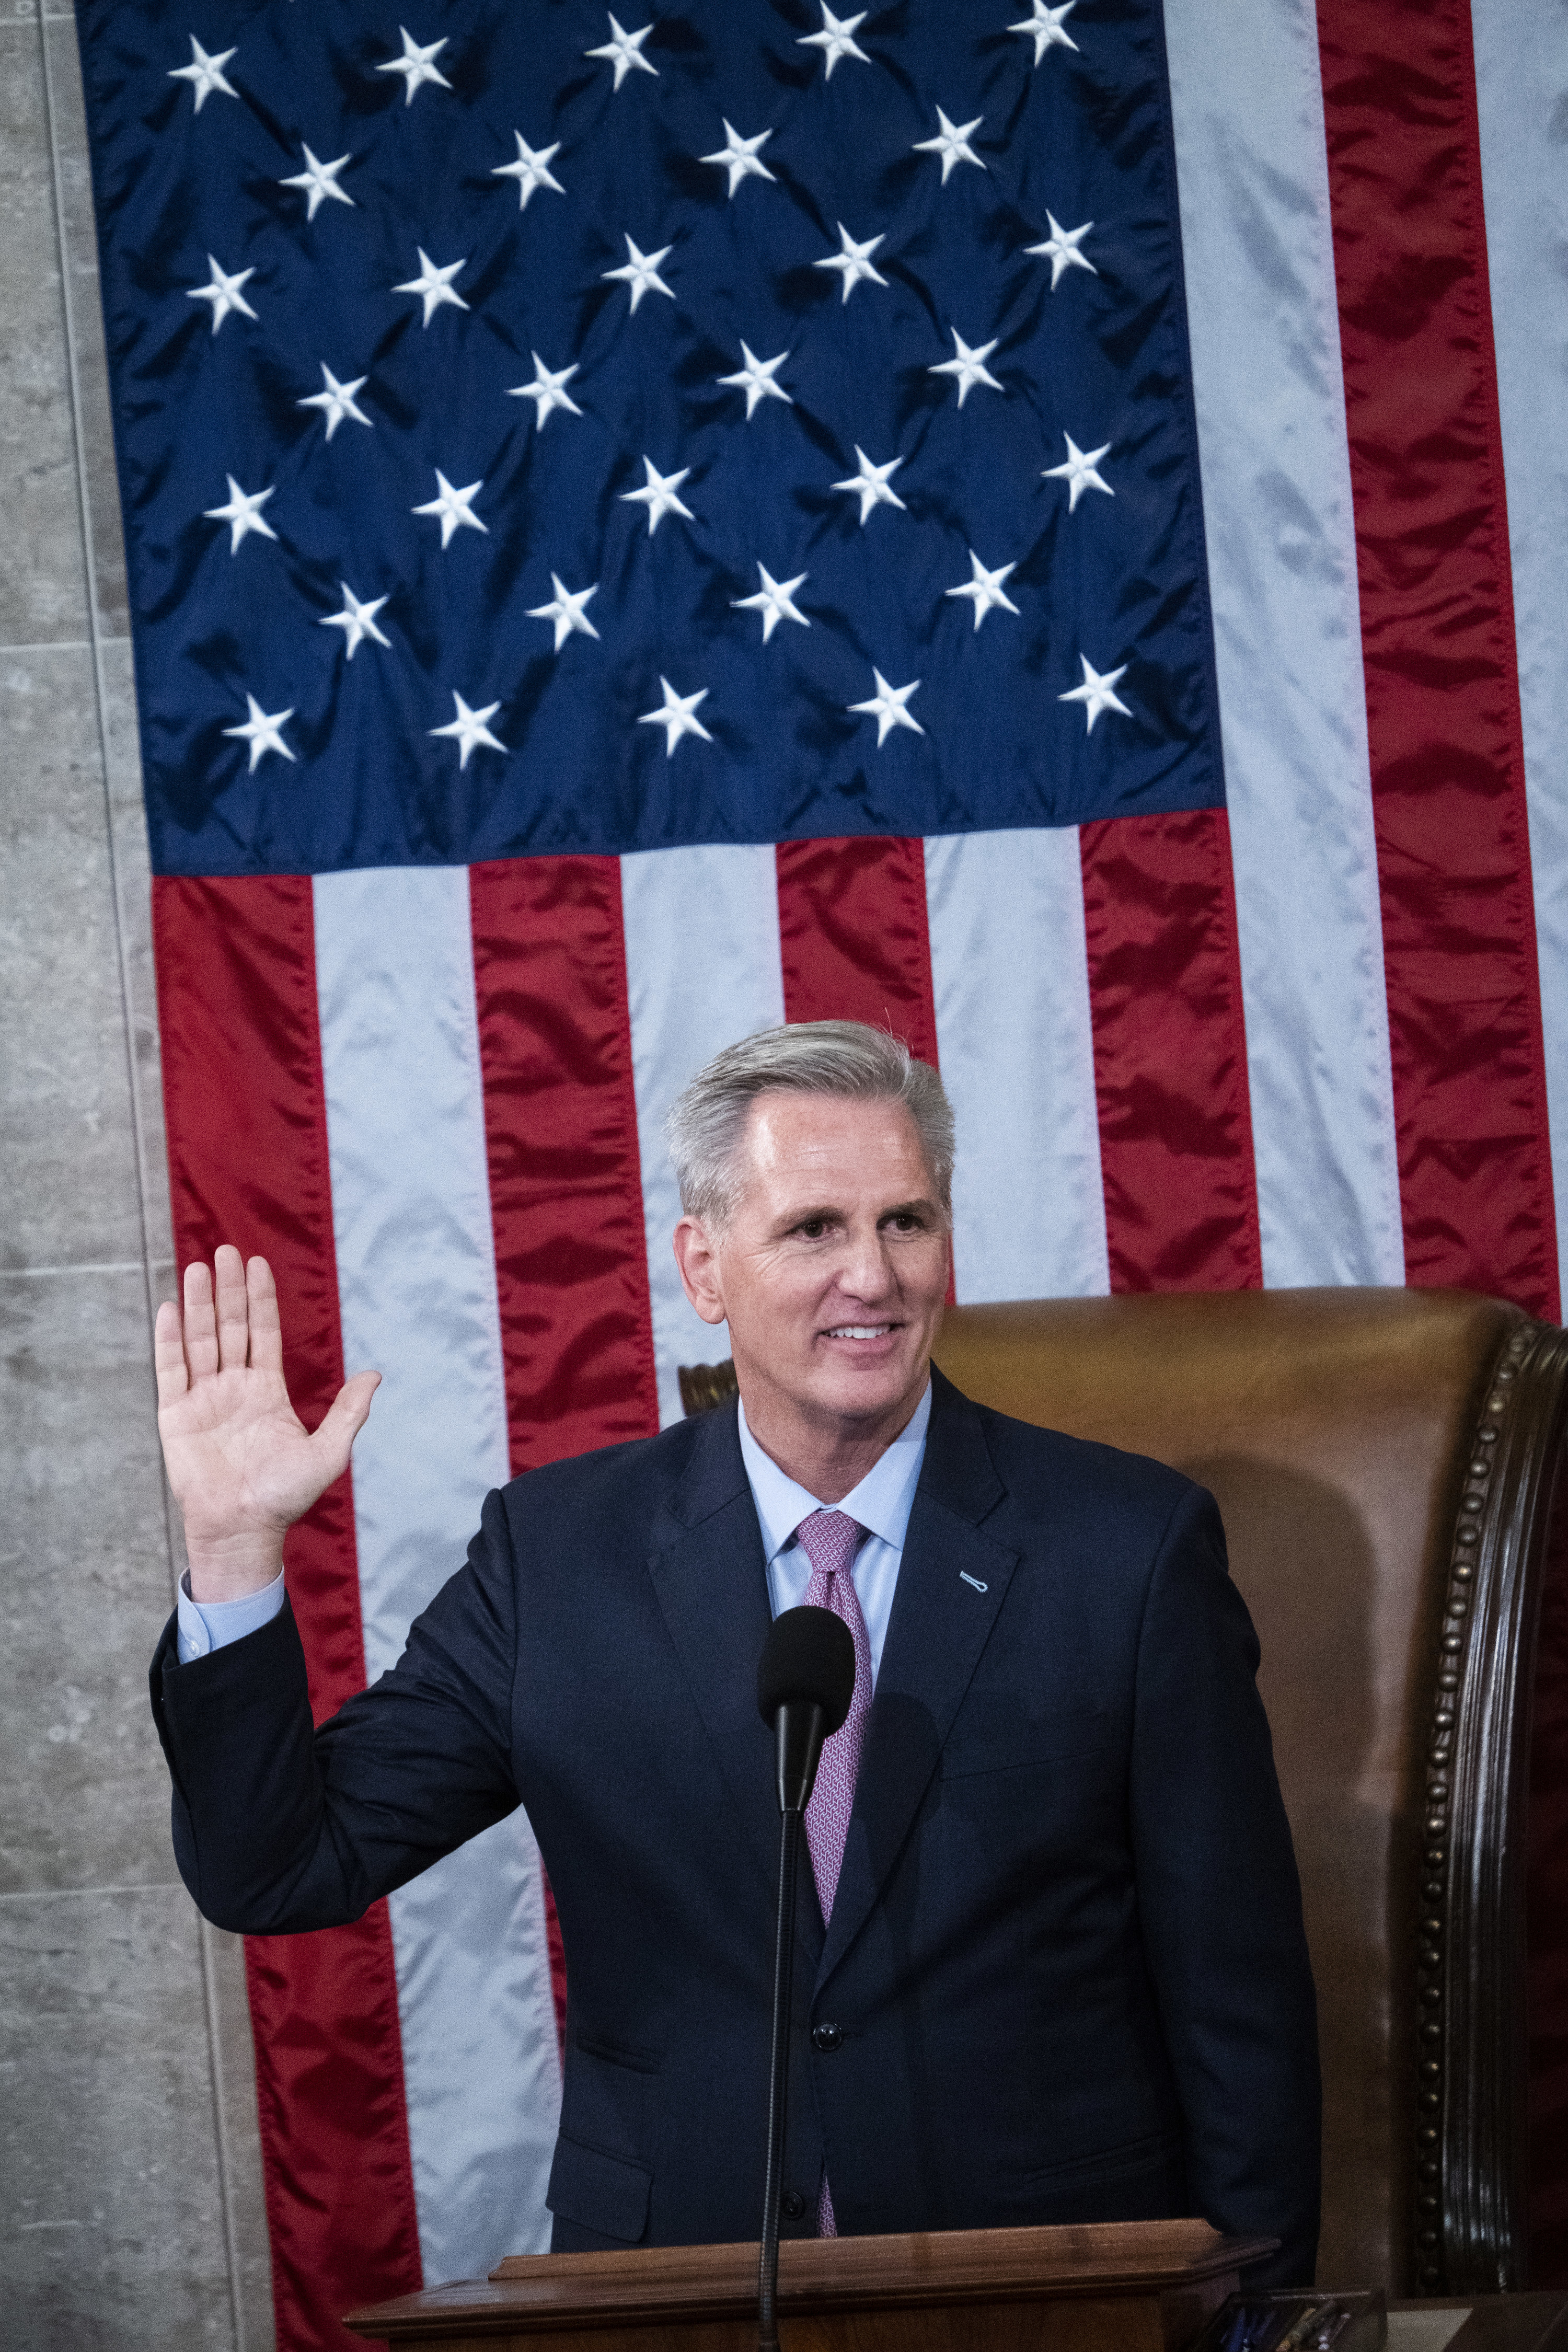 Kevin McCarthy raising his hand as speaker of the House